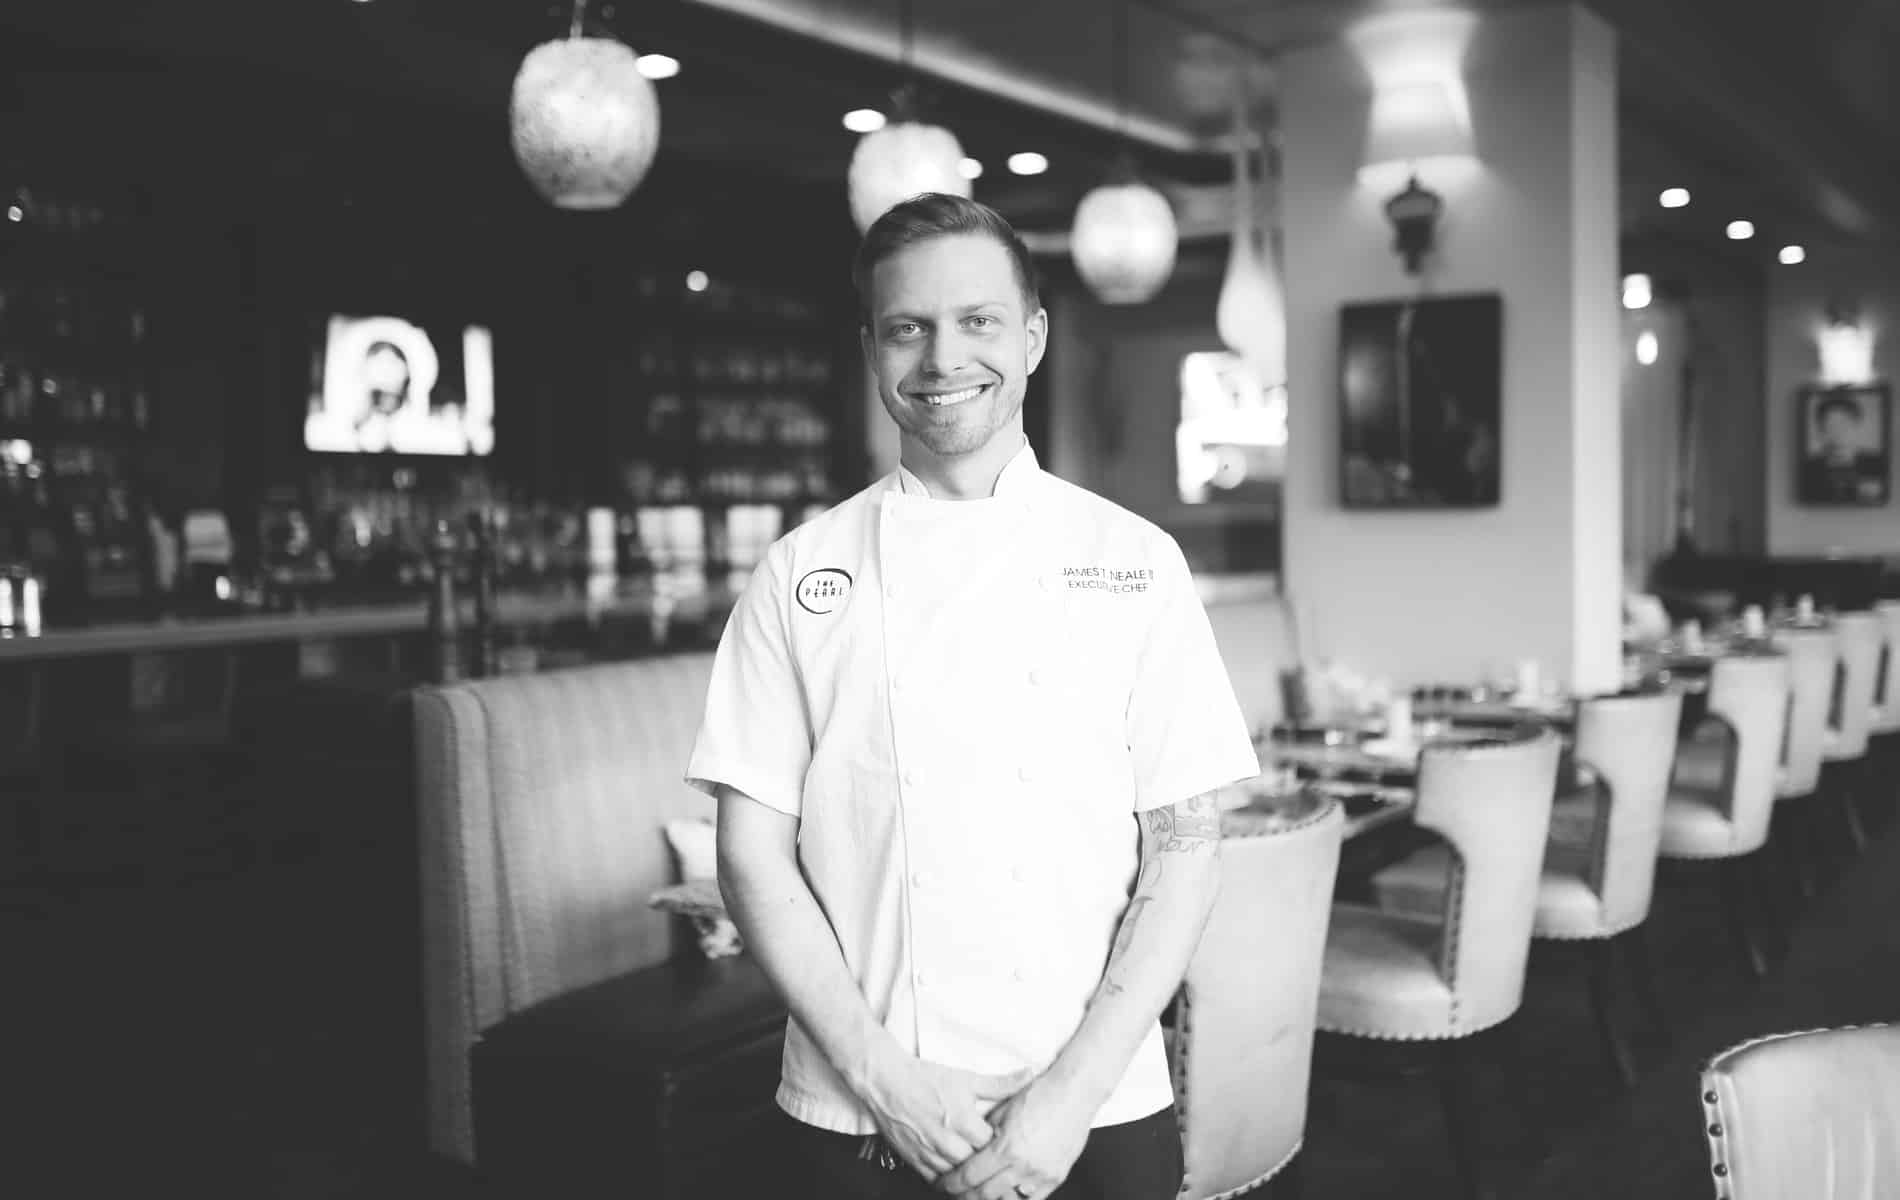 Chef James Neale of Havana Beach Bar & Grill at The Pearl hotel in Rosemary Beach, Florida | Photo by Brenna Kneiss